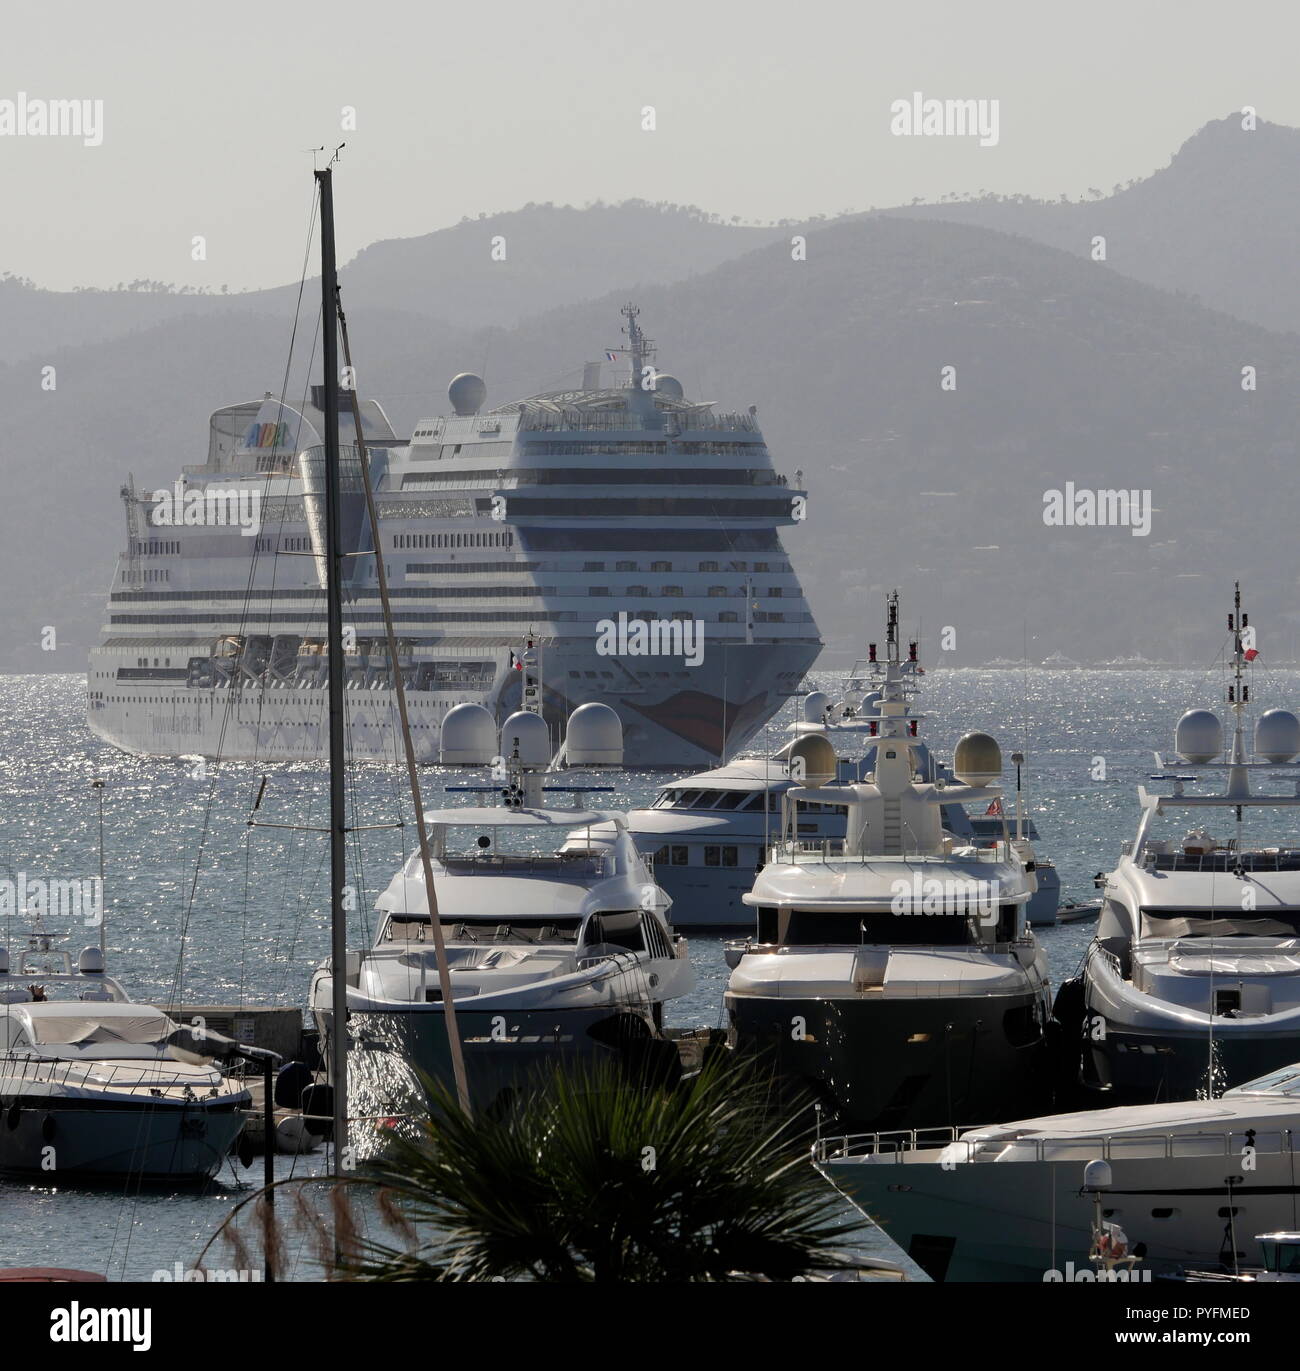 AJAXNETPHOTO. 2018. CANNES, FRANCE. - COTE D'AZUR RESORT - LOOKING WEST ACROSS THE BAY OF CANNES WITH SUPER YACHTS AND MOTOR CRUISERS MOORED IN PORT PIERRE CANTO MARINA FOREGROUND, THE CRUISE LINER AIDA STELLA IS ANCHORED IN THE BAY. PHOTO:JONATHAN EASTLAND/AJAX REF:GX8 182509 656 Stock Photo